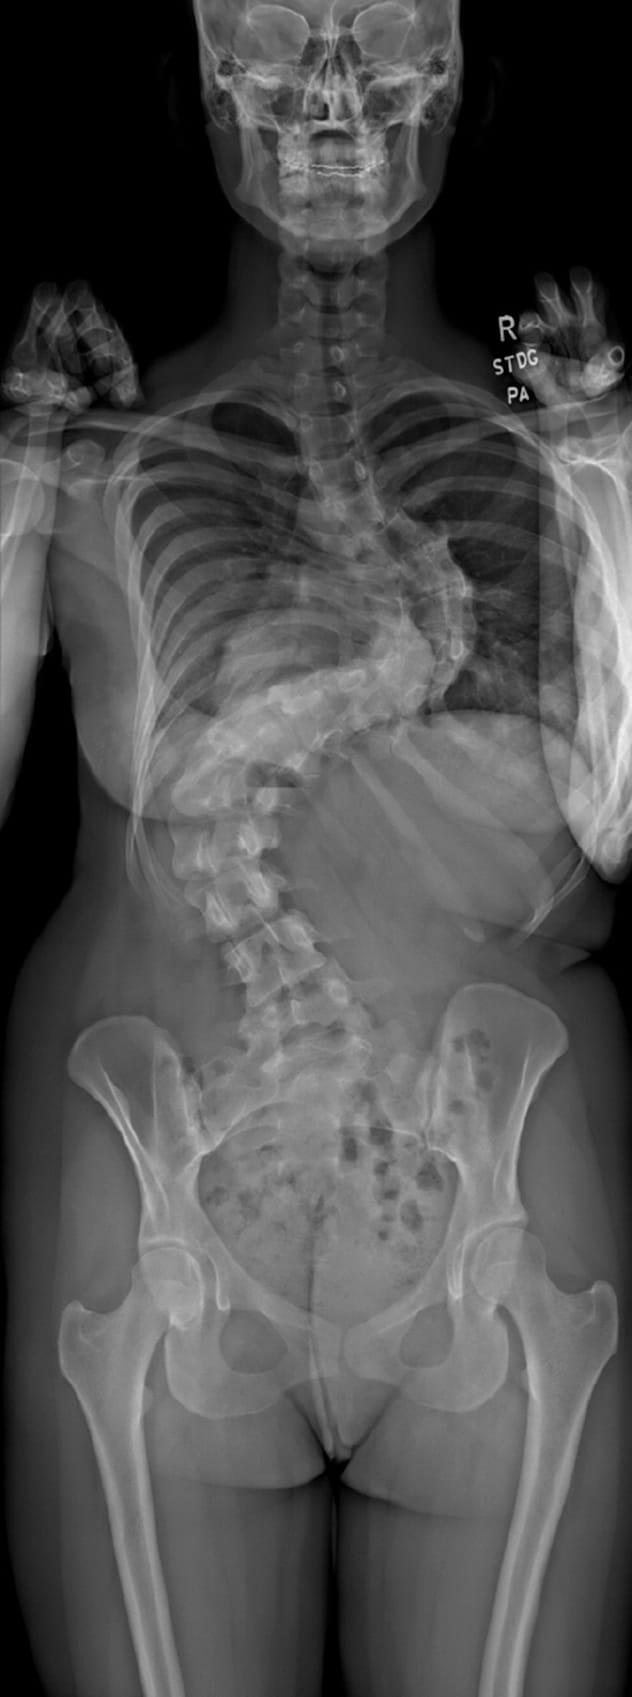 Preoperative radiograph shows scoliosis